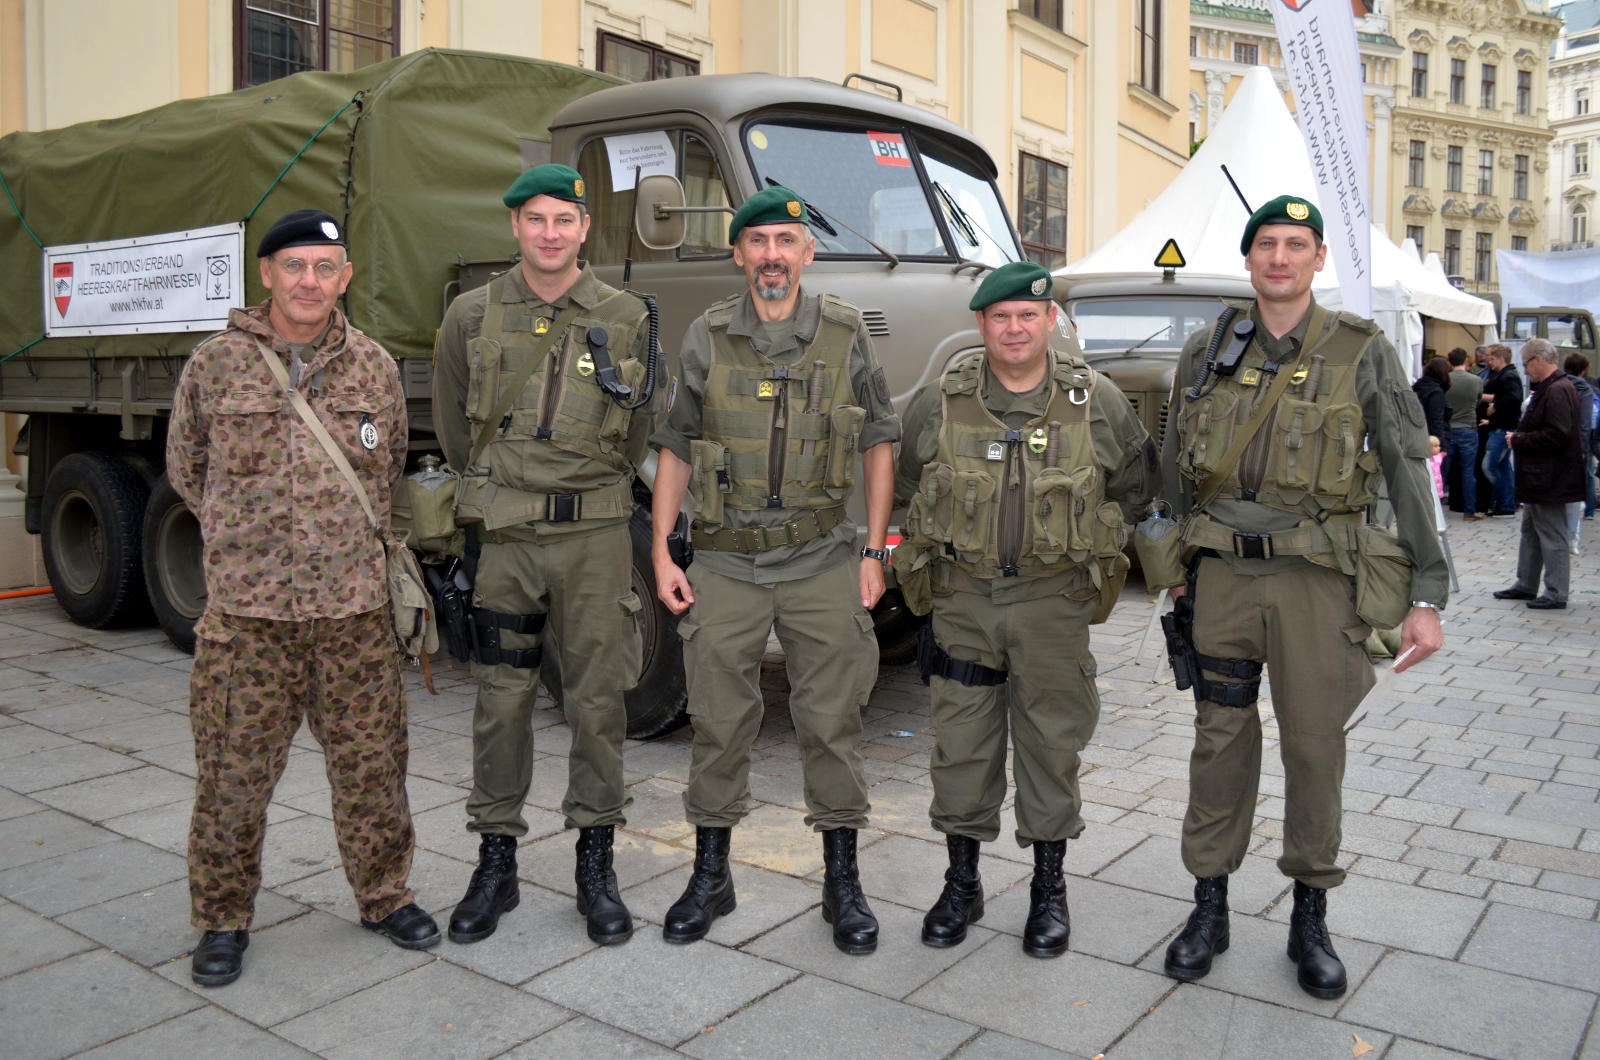 pljesak gen zajednica  Again Supporting the Austrian Army During Austria's National Day 2018